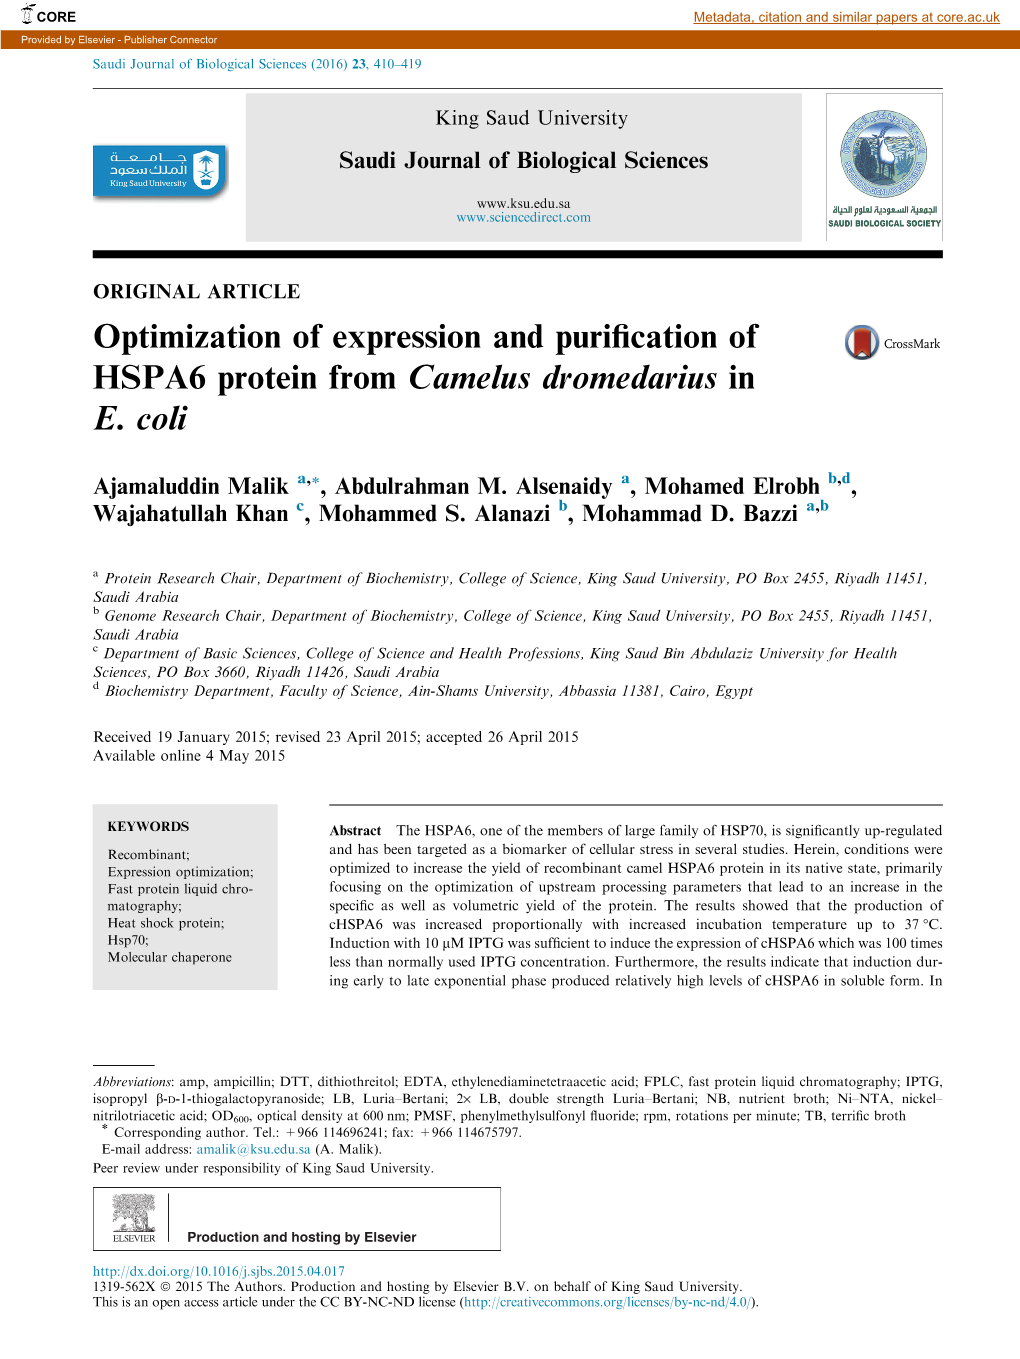 Optimization of Expression and Purification of HSPA6 Protein From